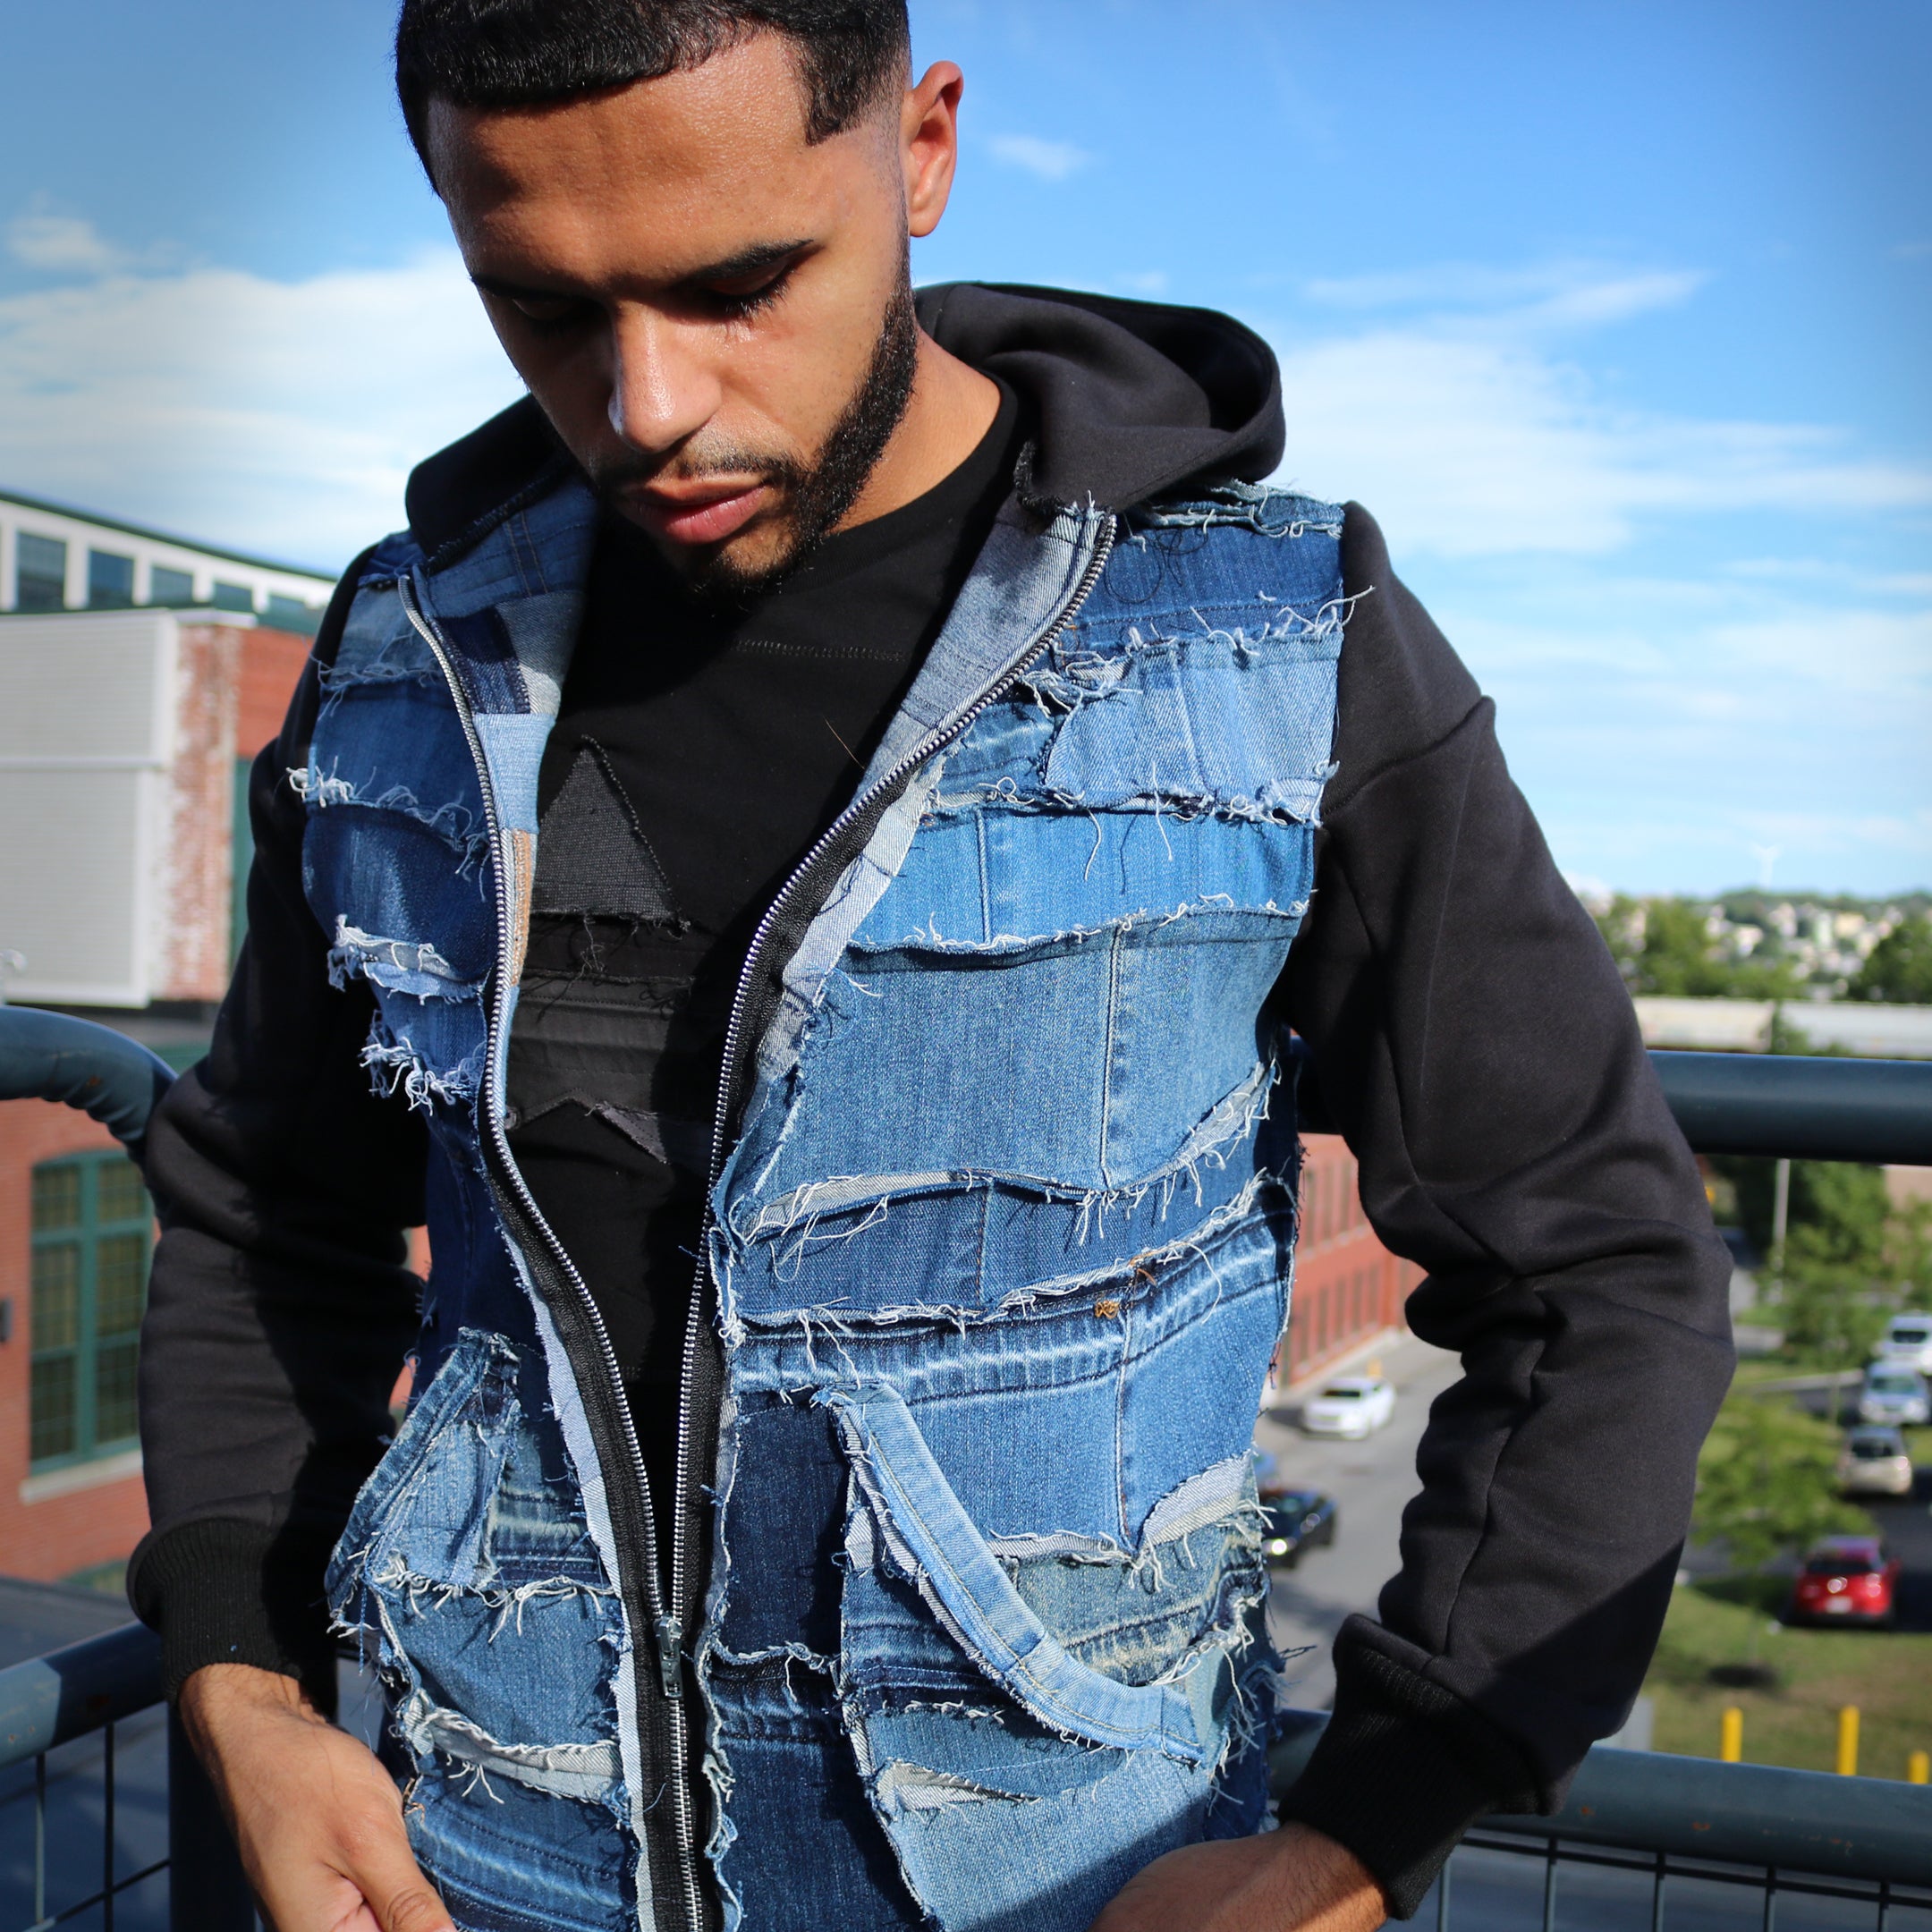 Mens Summer Denim Vest With Ripped Details, Washed Jeans Mens Waistcoat  With Jeans, Cowboy Hip Hop Style, Sleeveless Jacket From Missher, $21.58 |  DHgate.Com